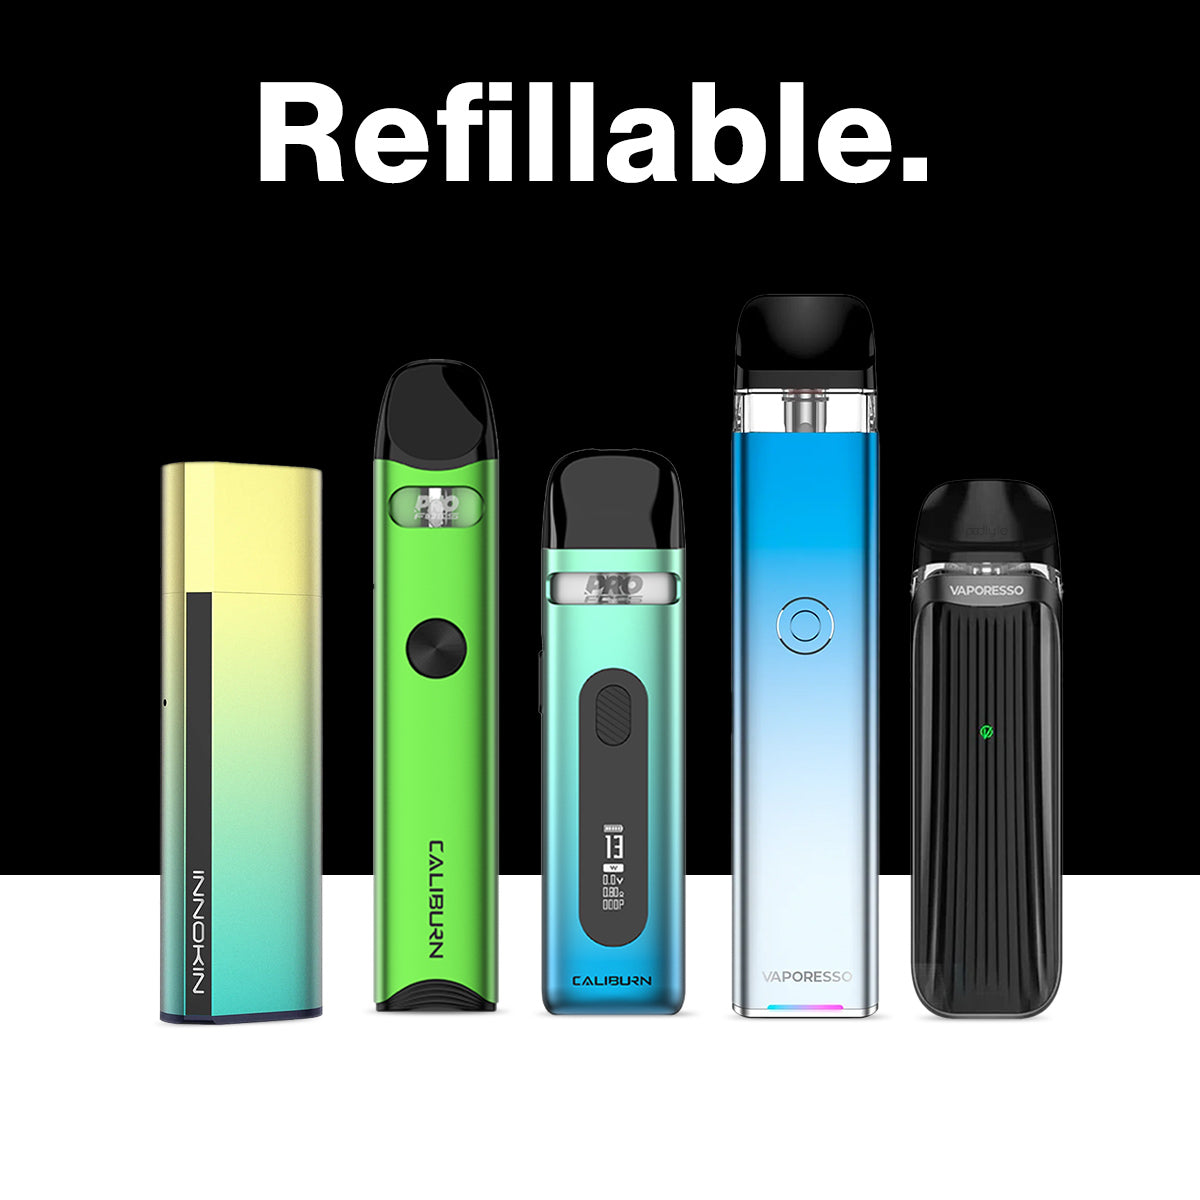 Refillable Pod Systems